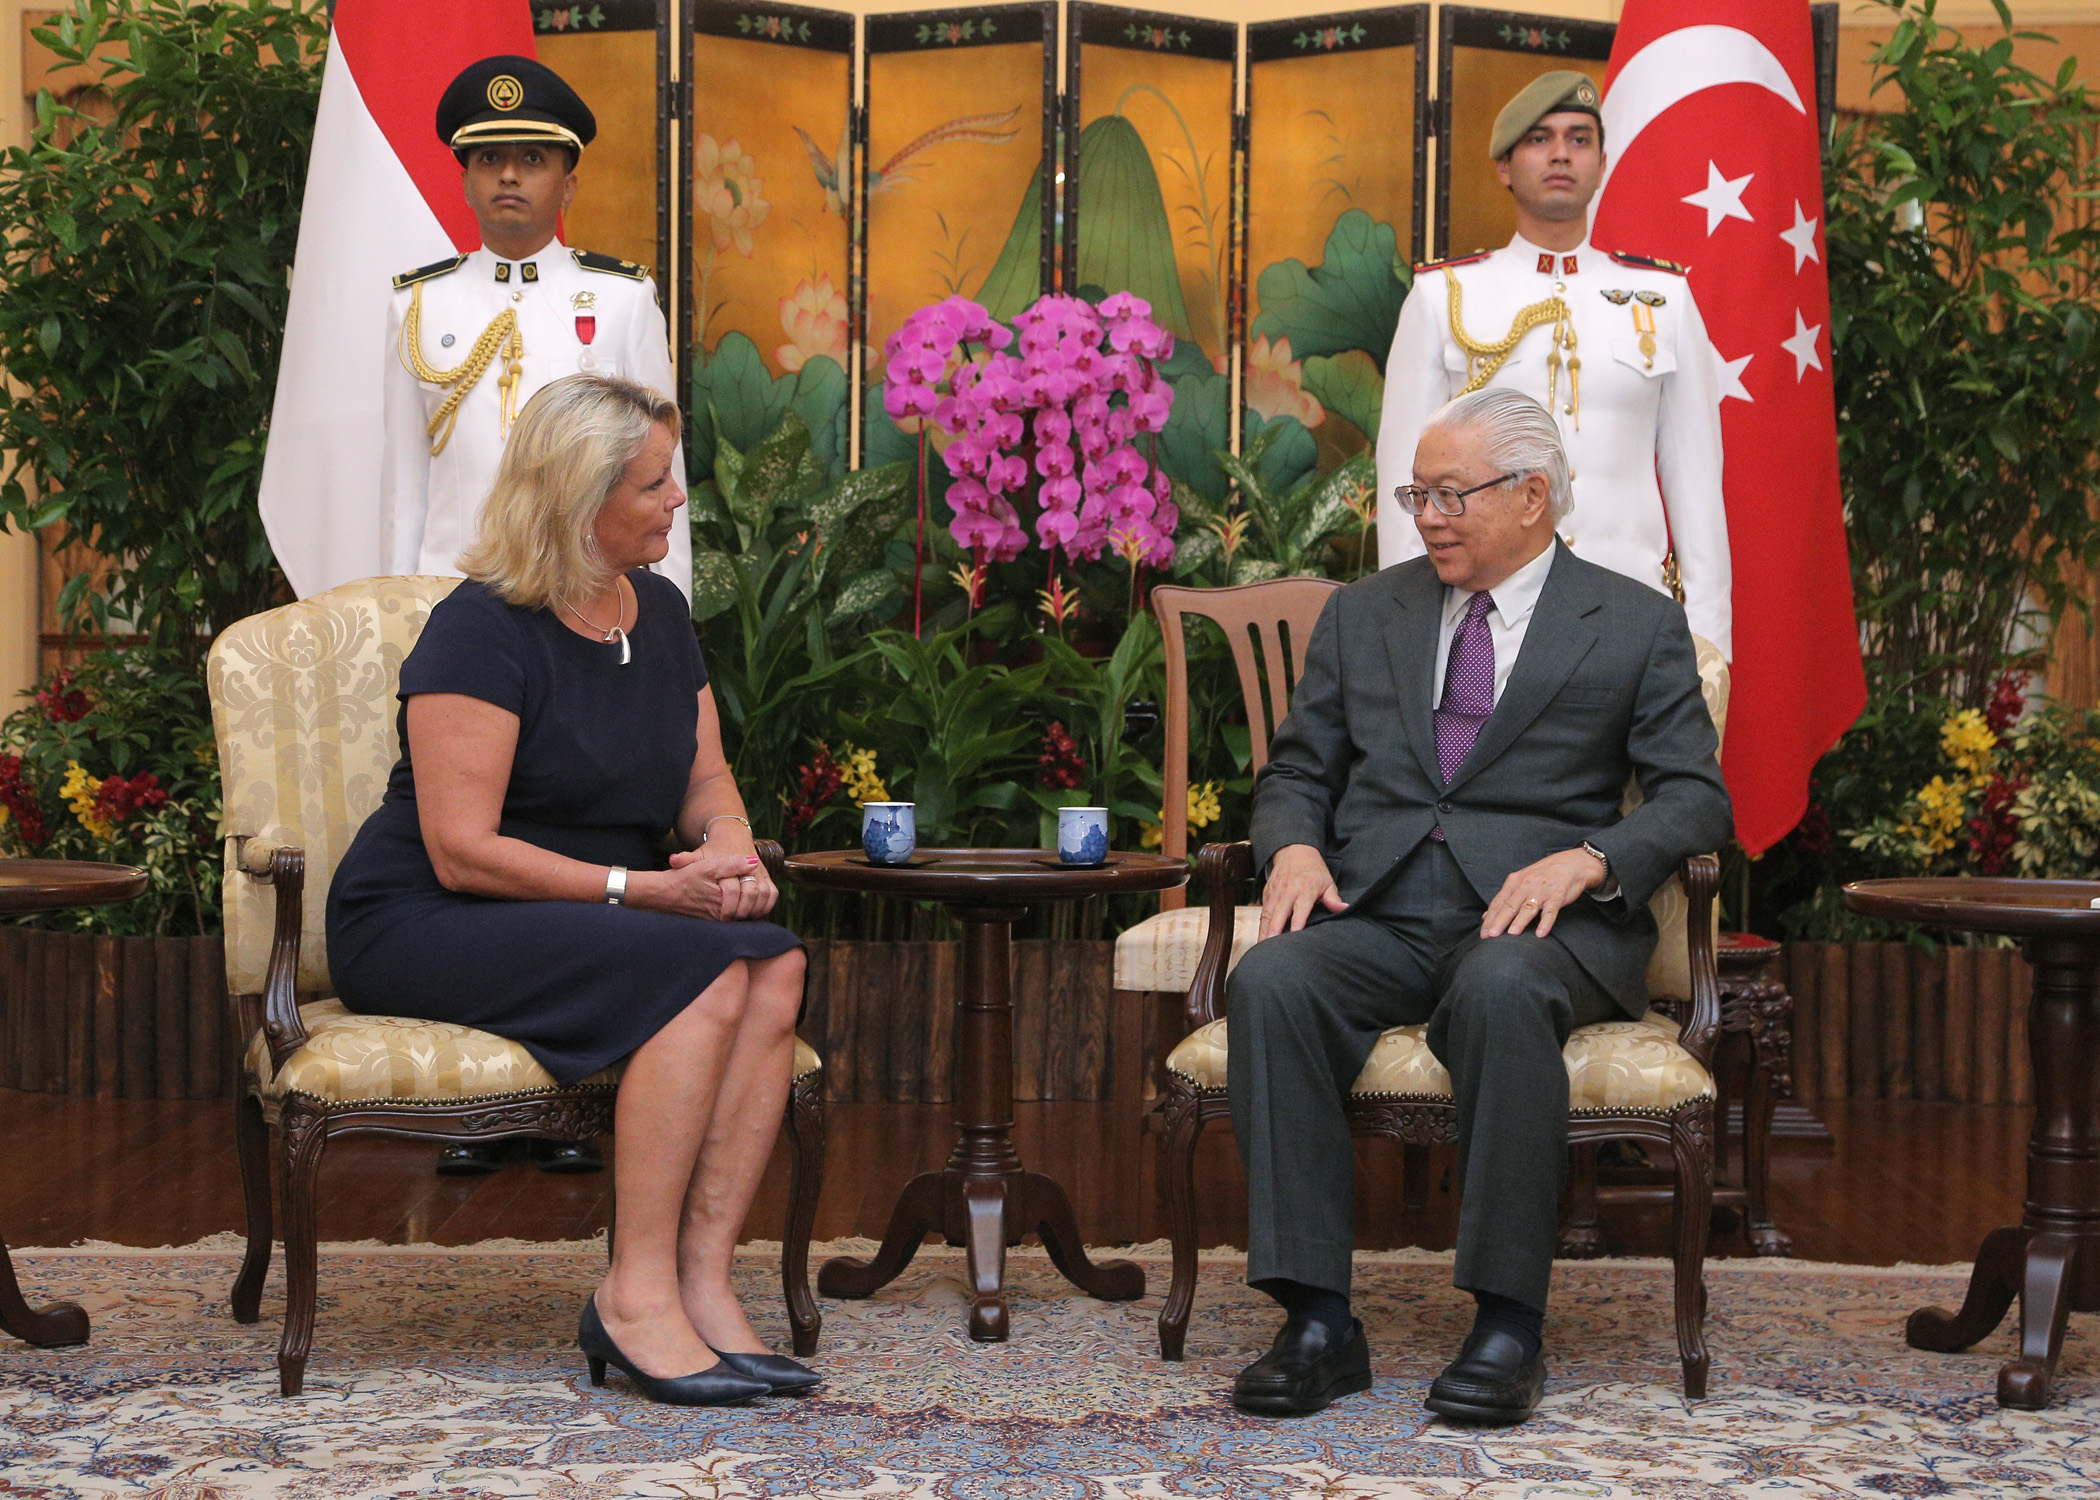  Finnish Ambassador in Singapore, Paula Parviainen, and the President of Singapore, Tony Tan. Source of picture: finland.org.sg